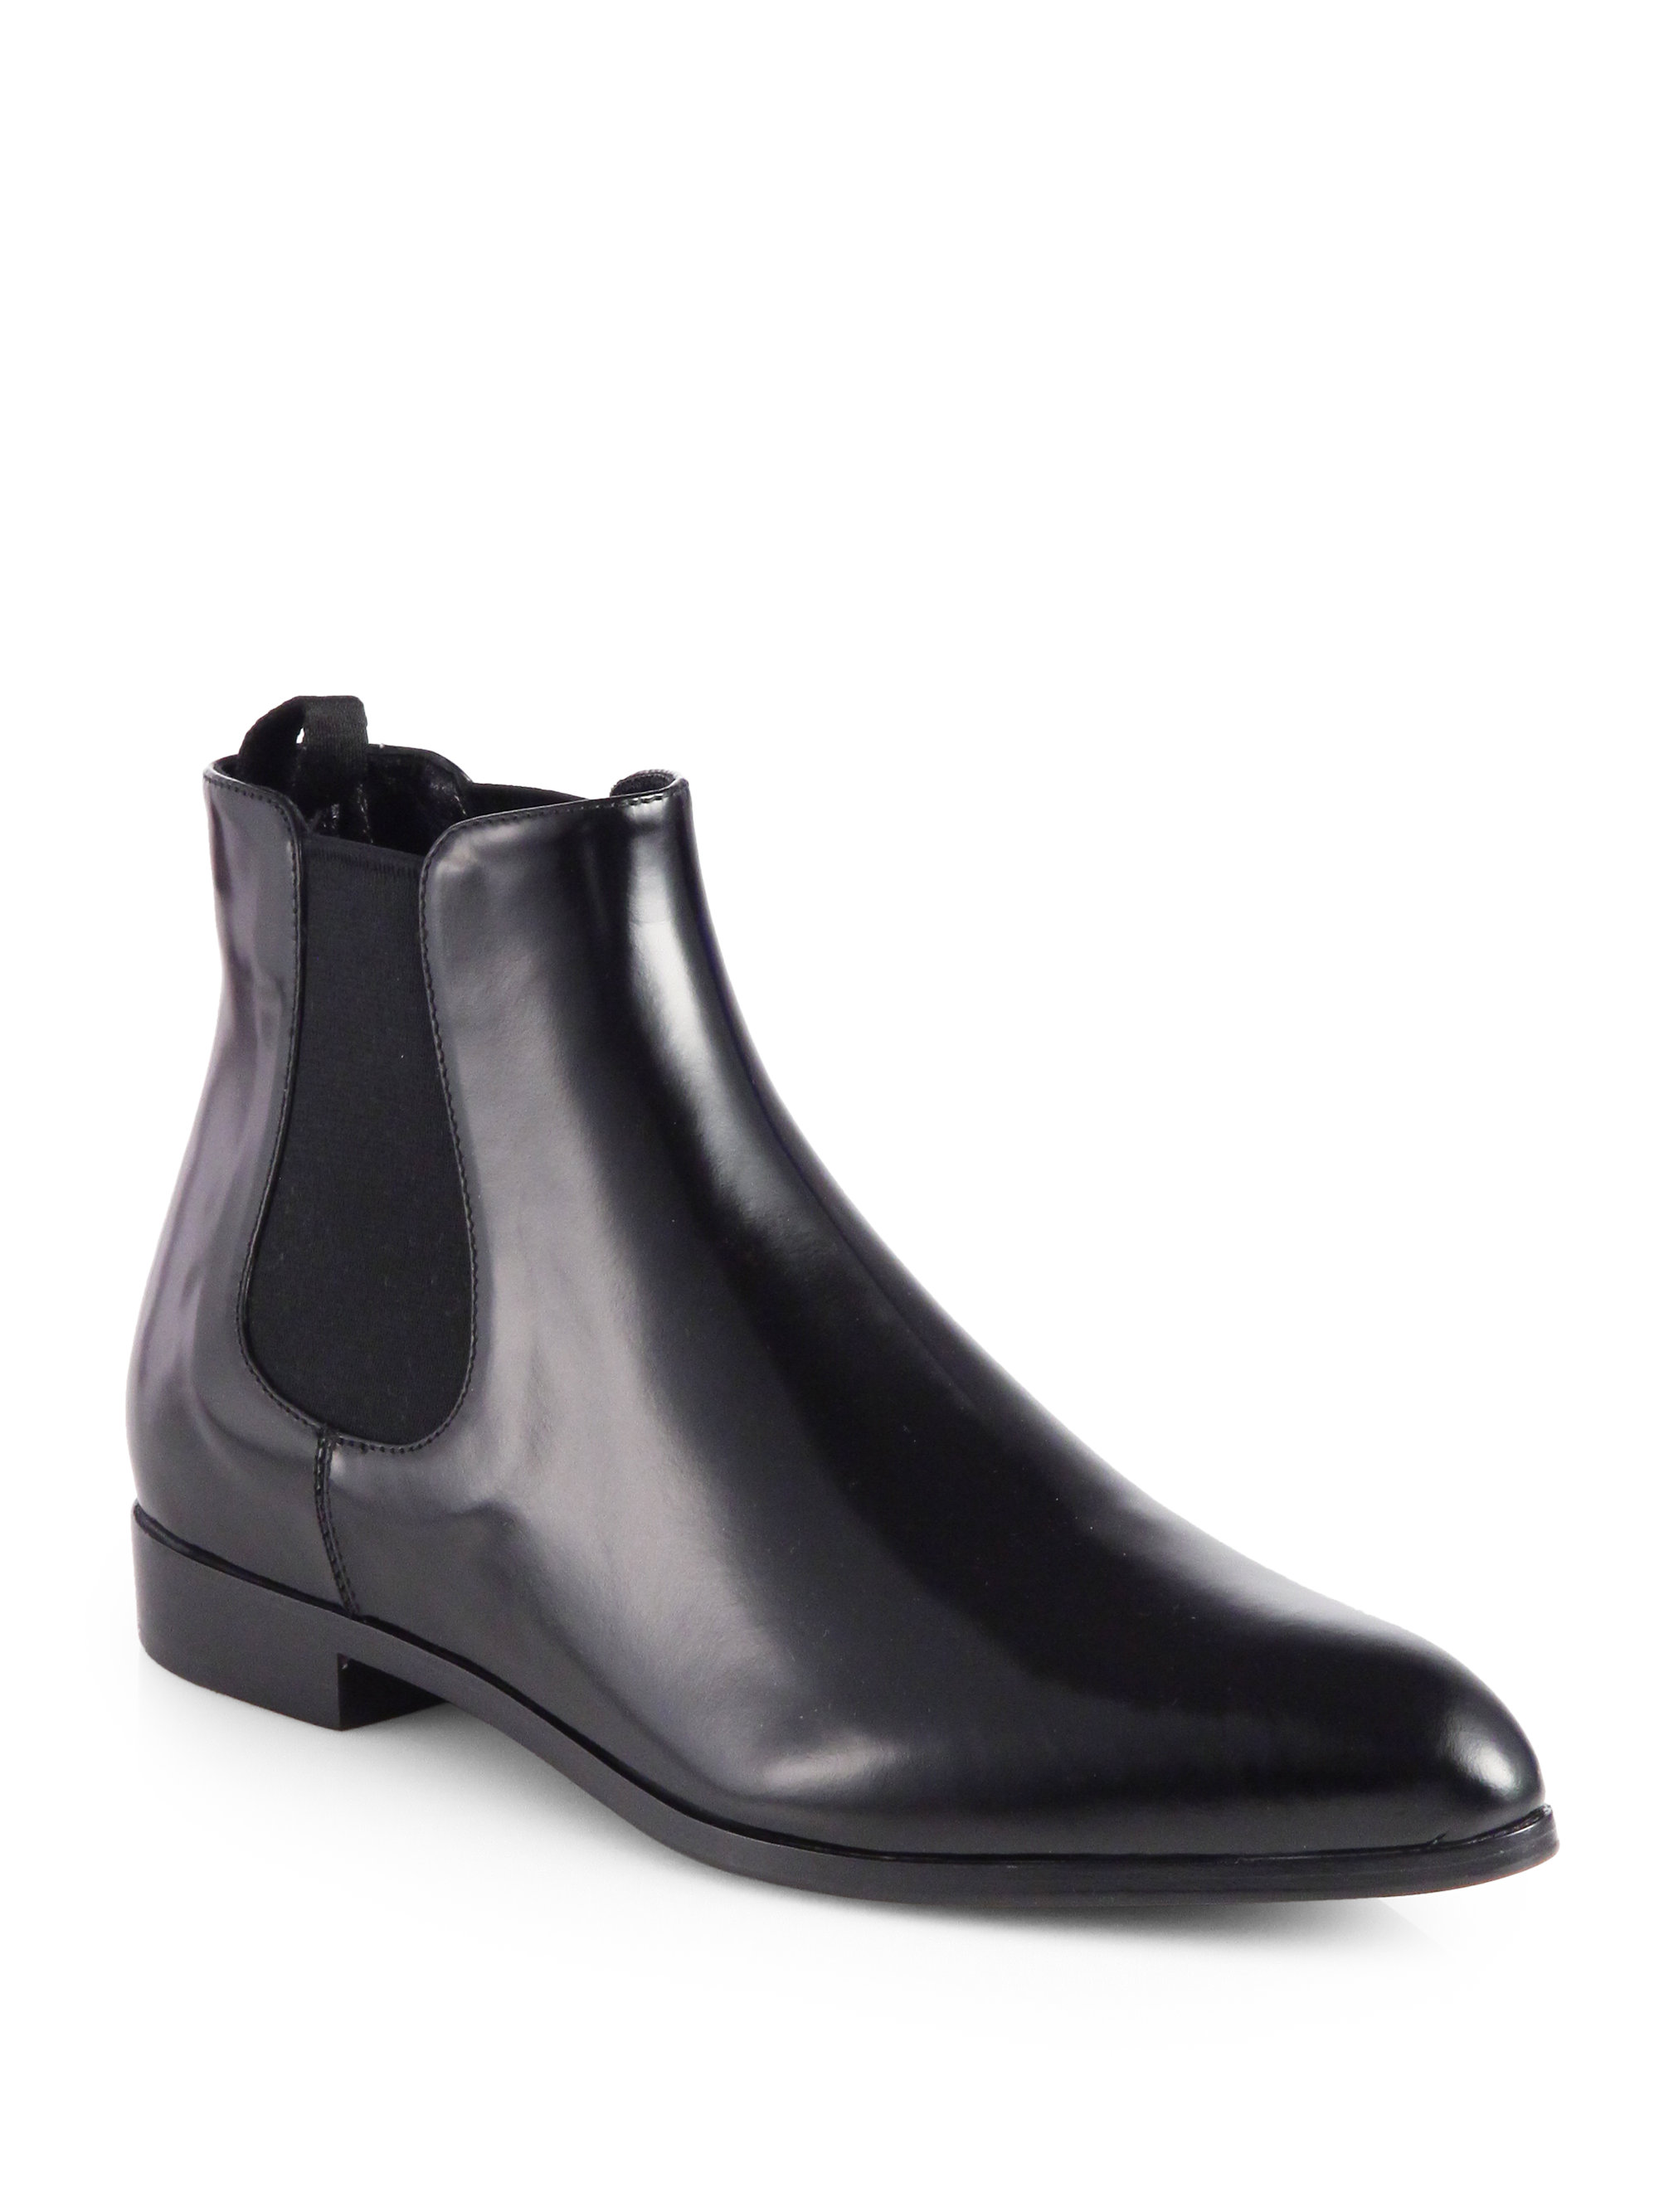 Lyst - Prada Polished Leather Chelsea Boots in Black for Men